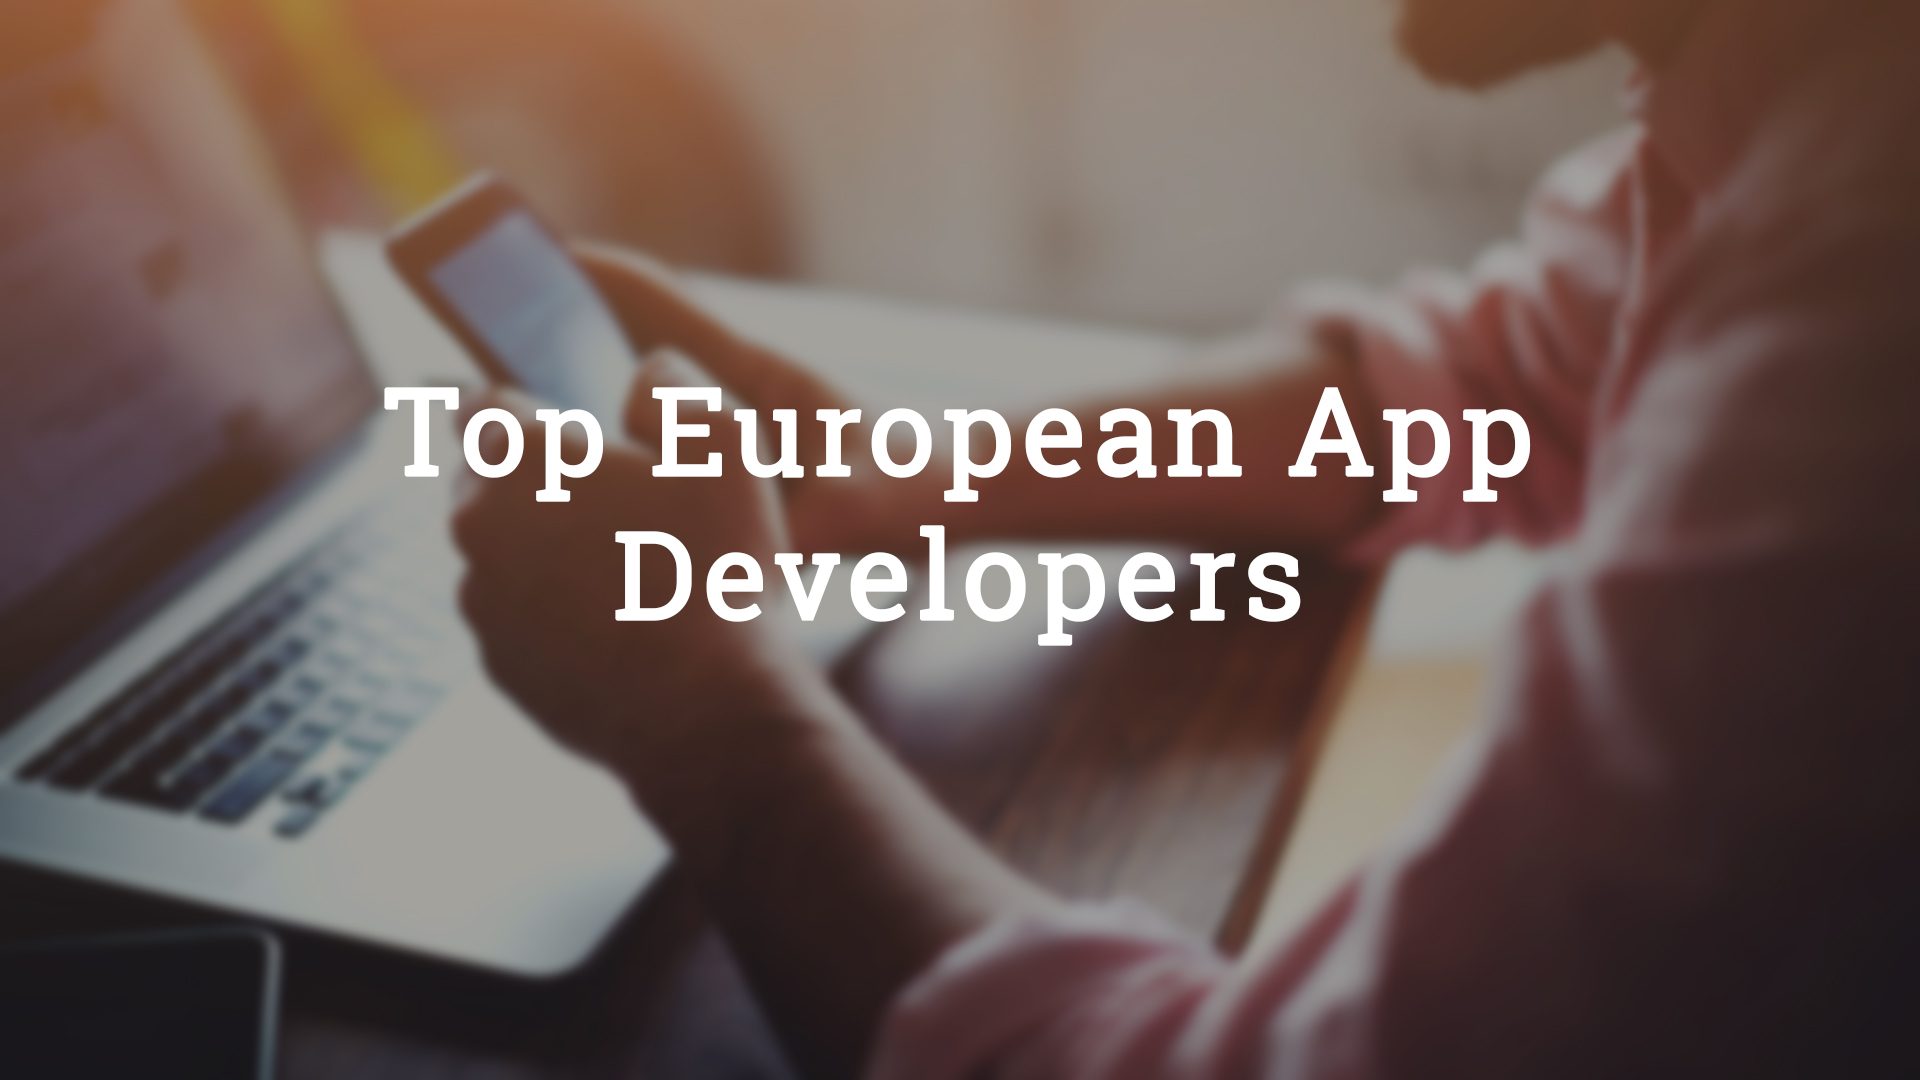 TechMagic joined Top European App Developers [Clutch.co research]